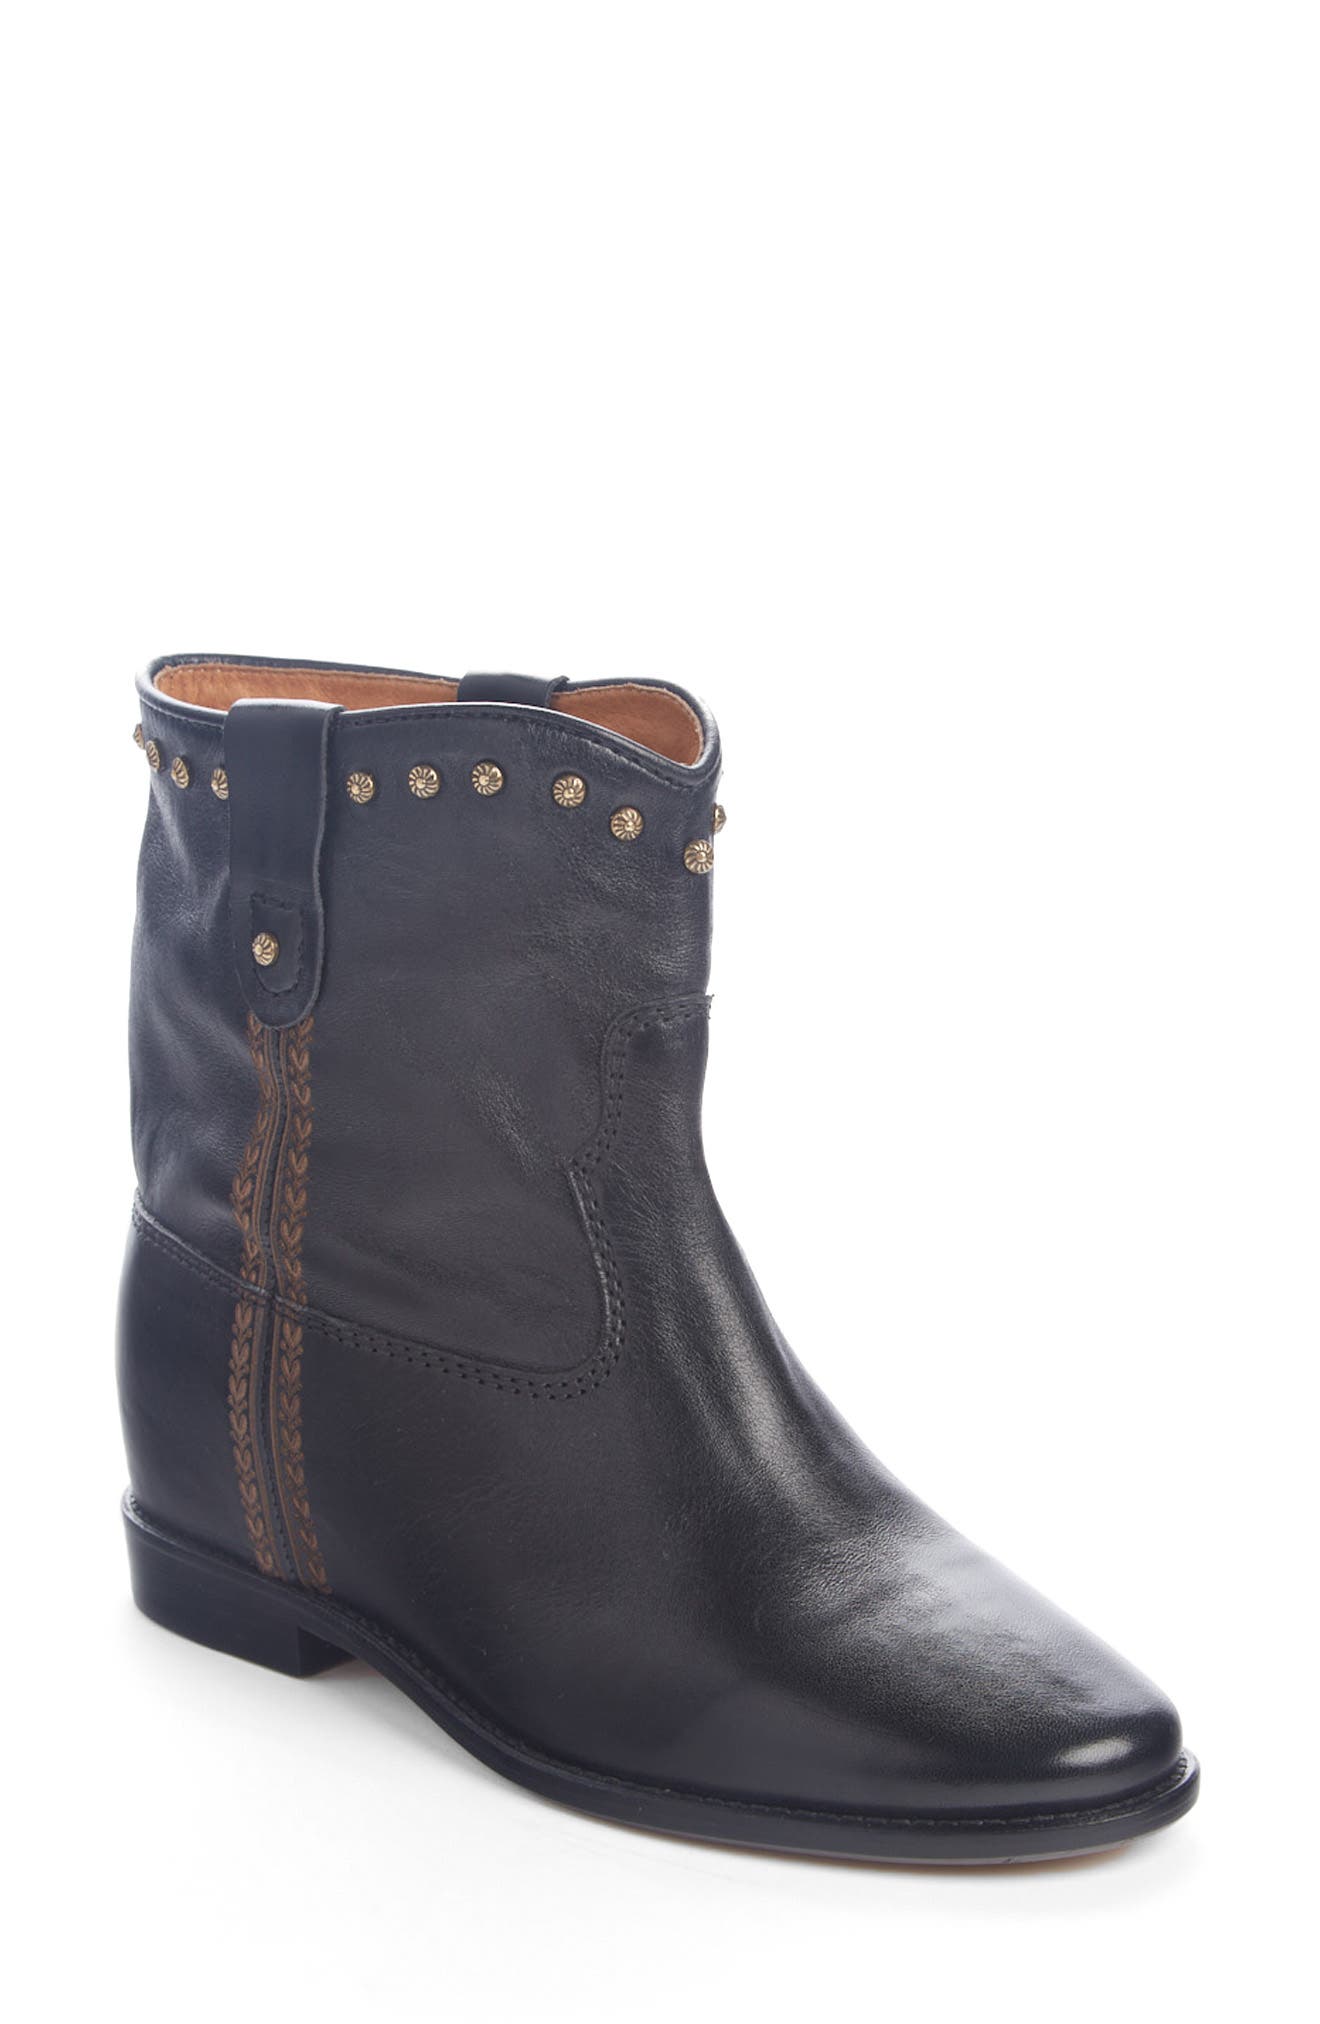 Women's Slouch Boots | Nordstrom